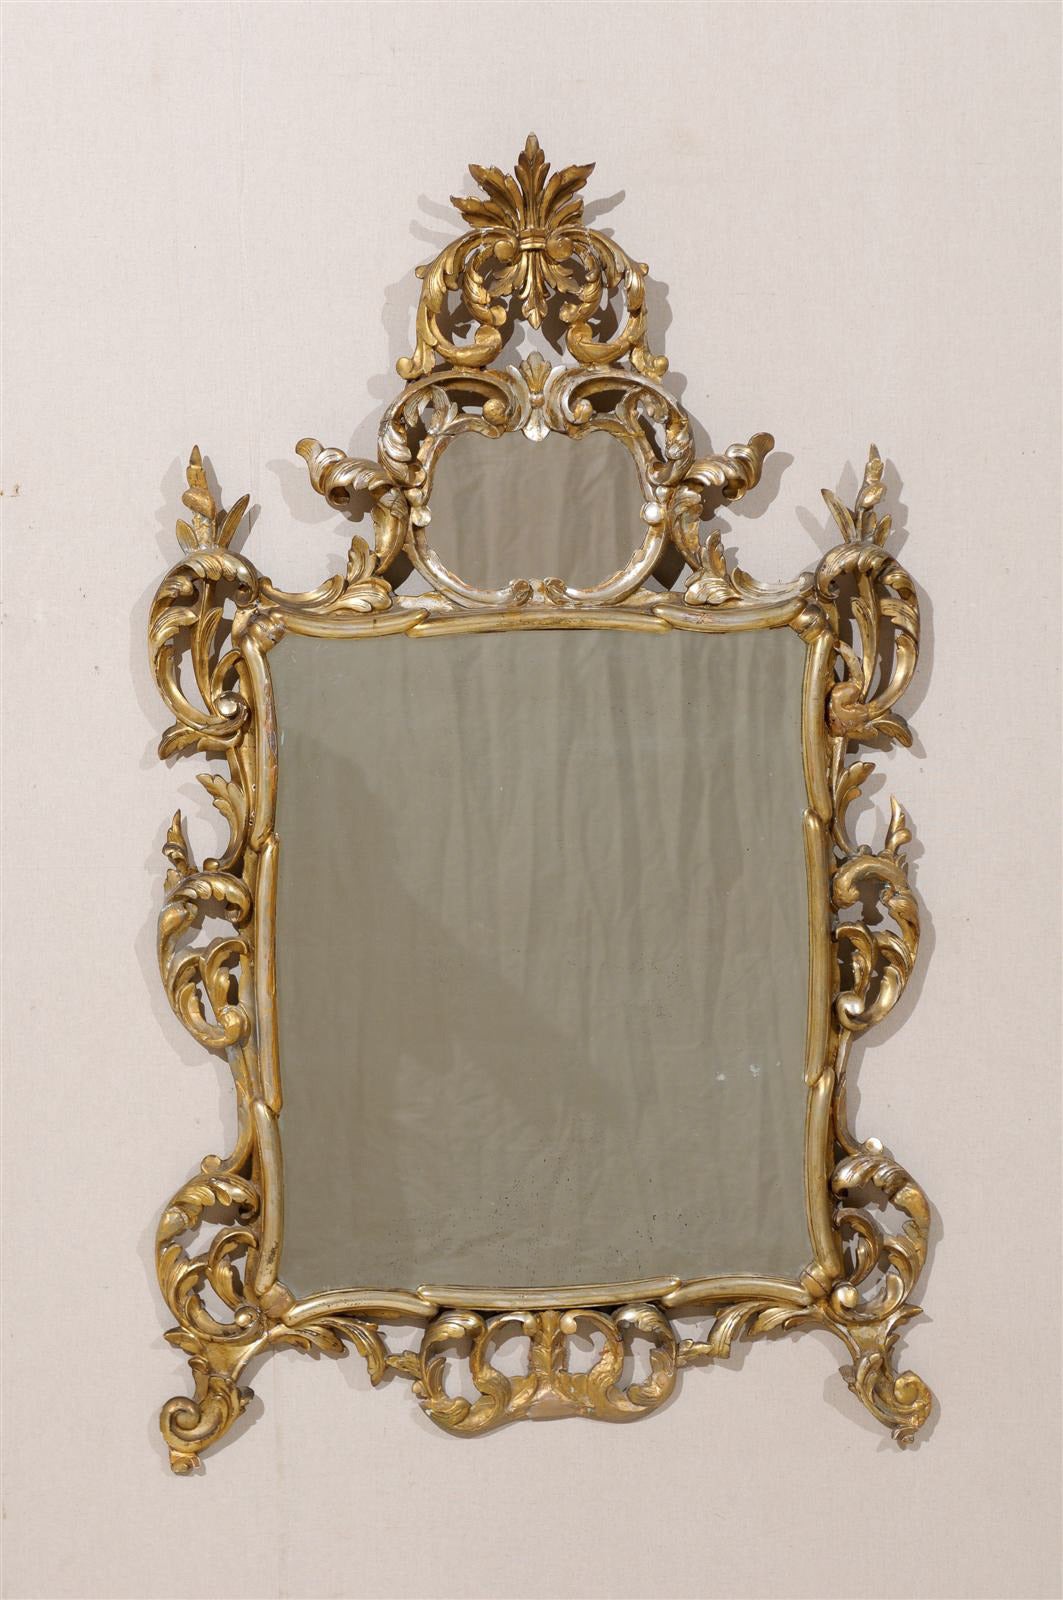 An Italian early 20th century gold and silver gilt mirror with Richly Carved wood with old mirror.